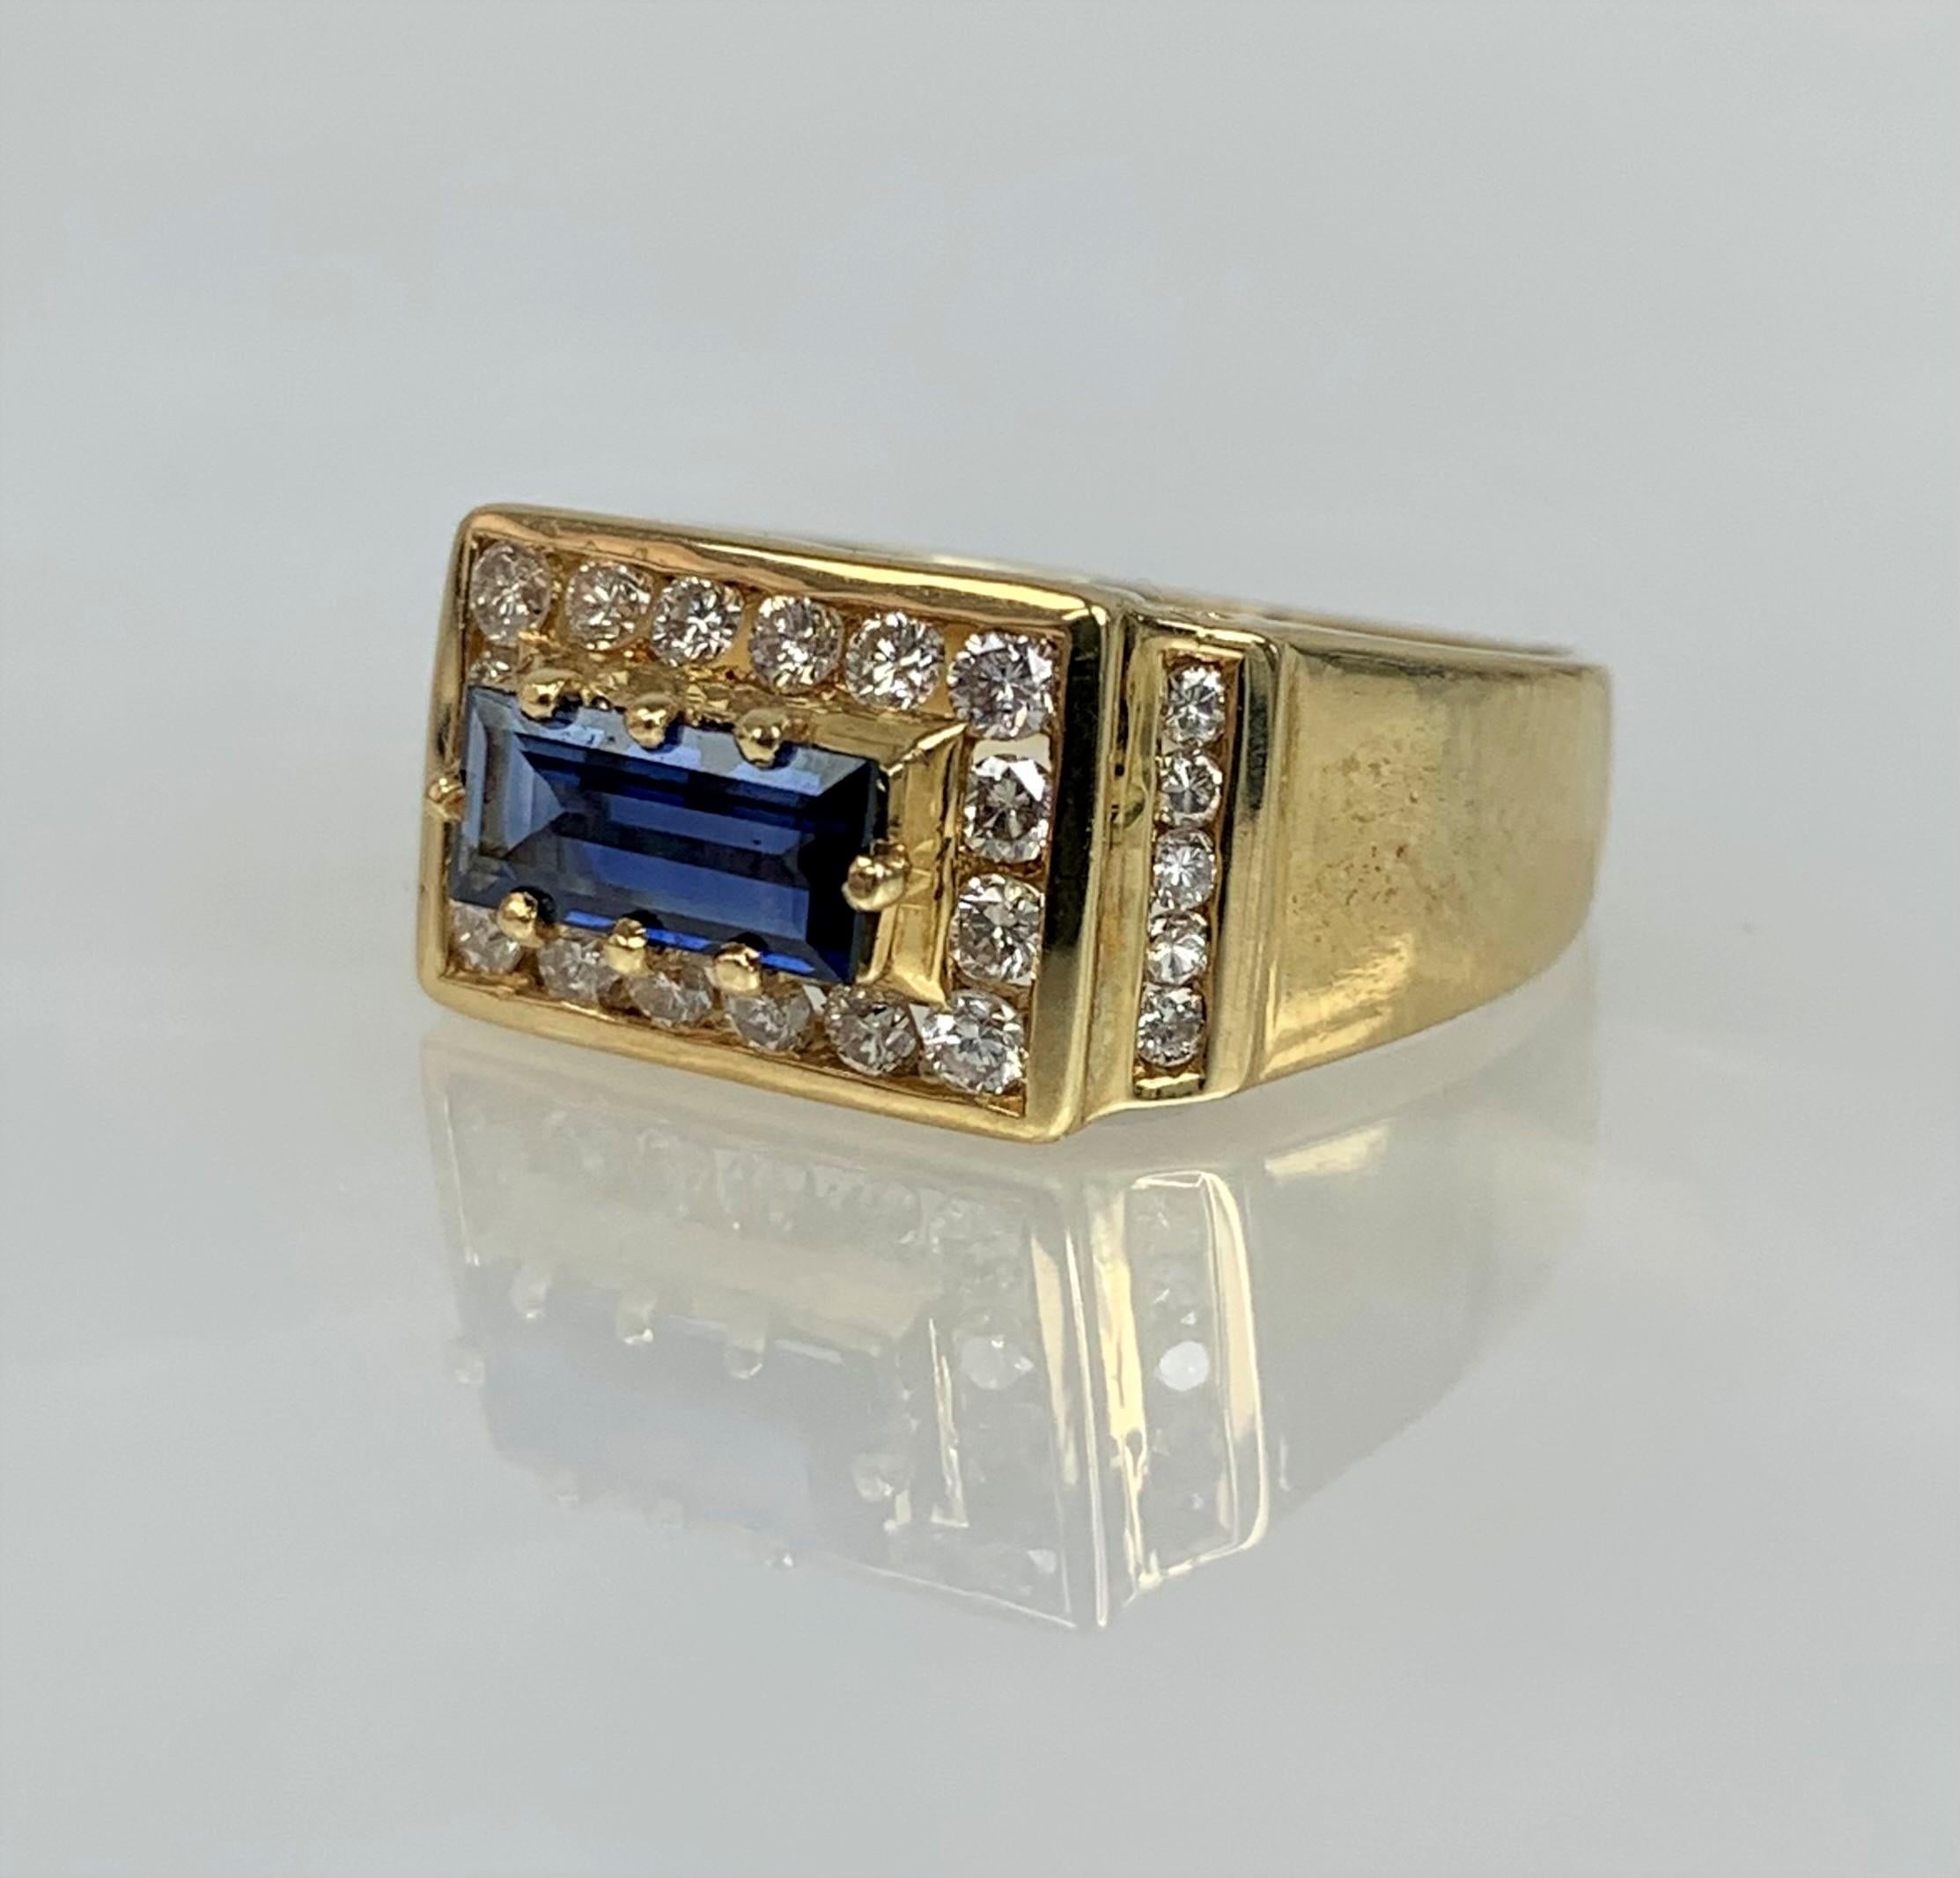 An unusual and luxurious vintage sapphire ring featuring an emerald cut center stone weighing 0.69 carats set in an east-west orientation while accented by 0.53 carats of sparkling white diamonds with channel setting in solid 18k yellow